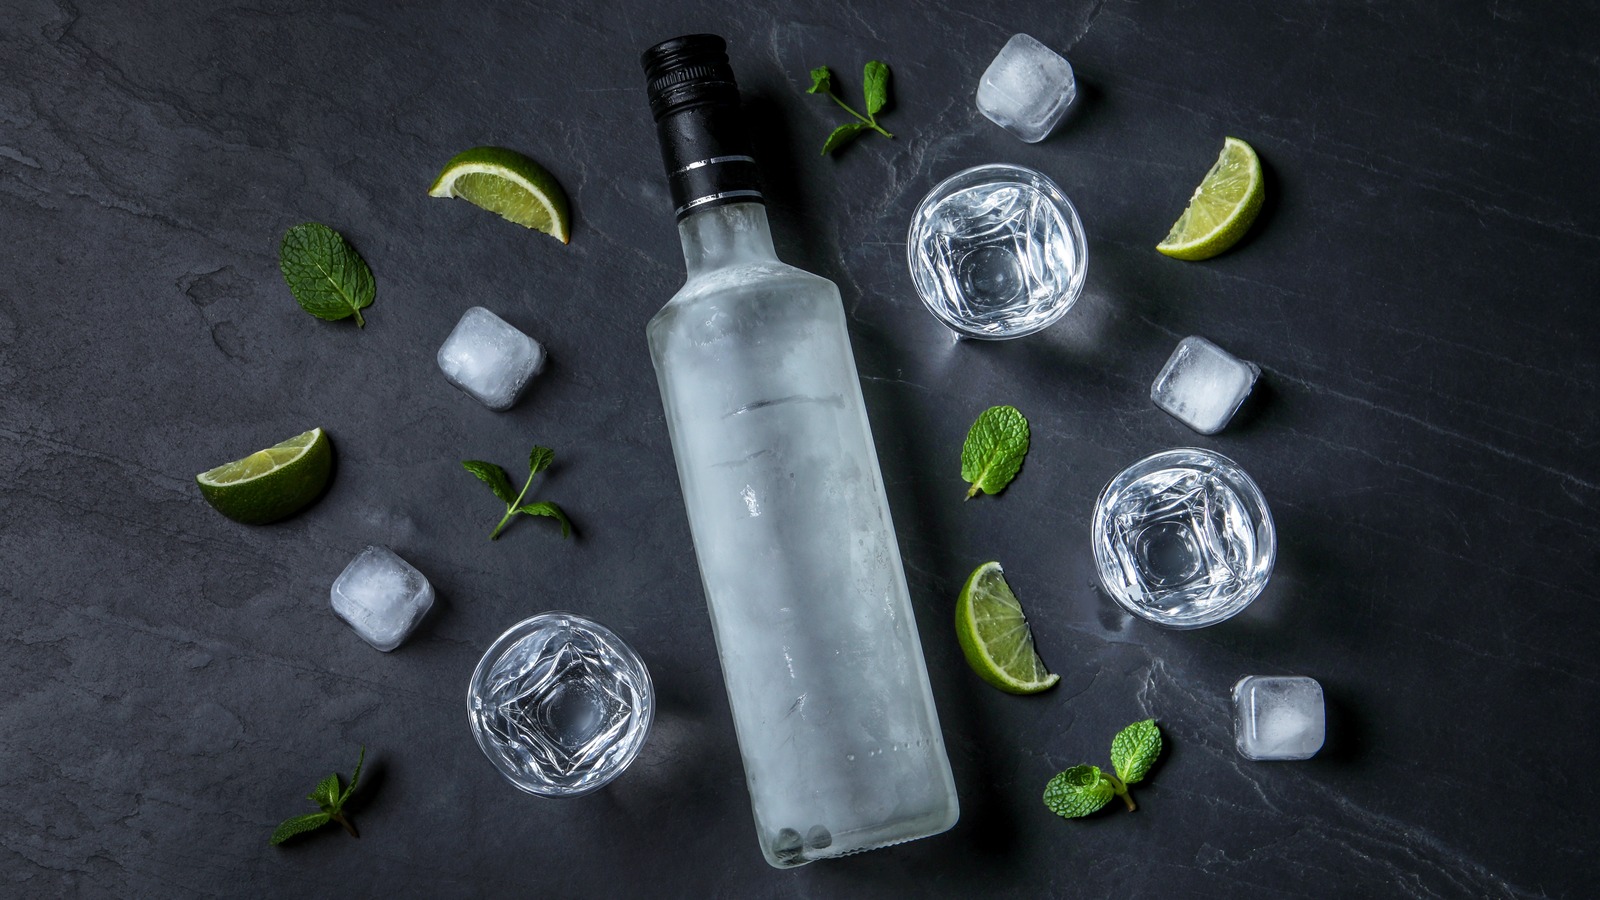 Store Cheap Vodka in the Freezer for an Incredibly Smooth Finish